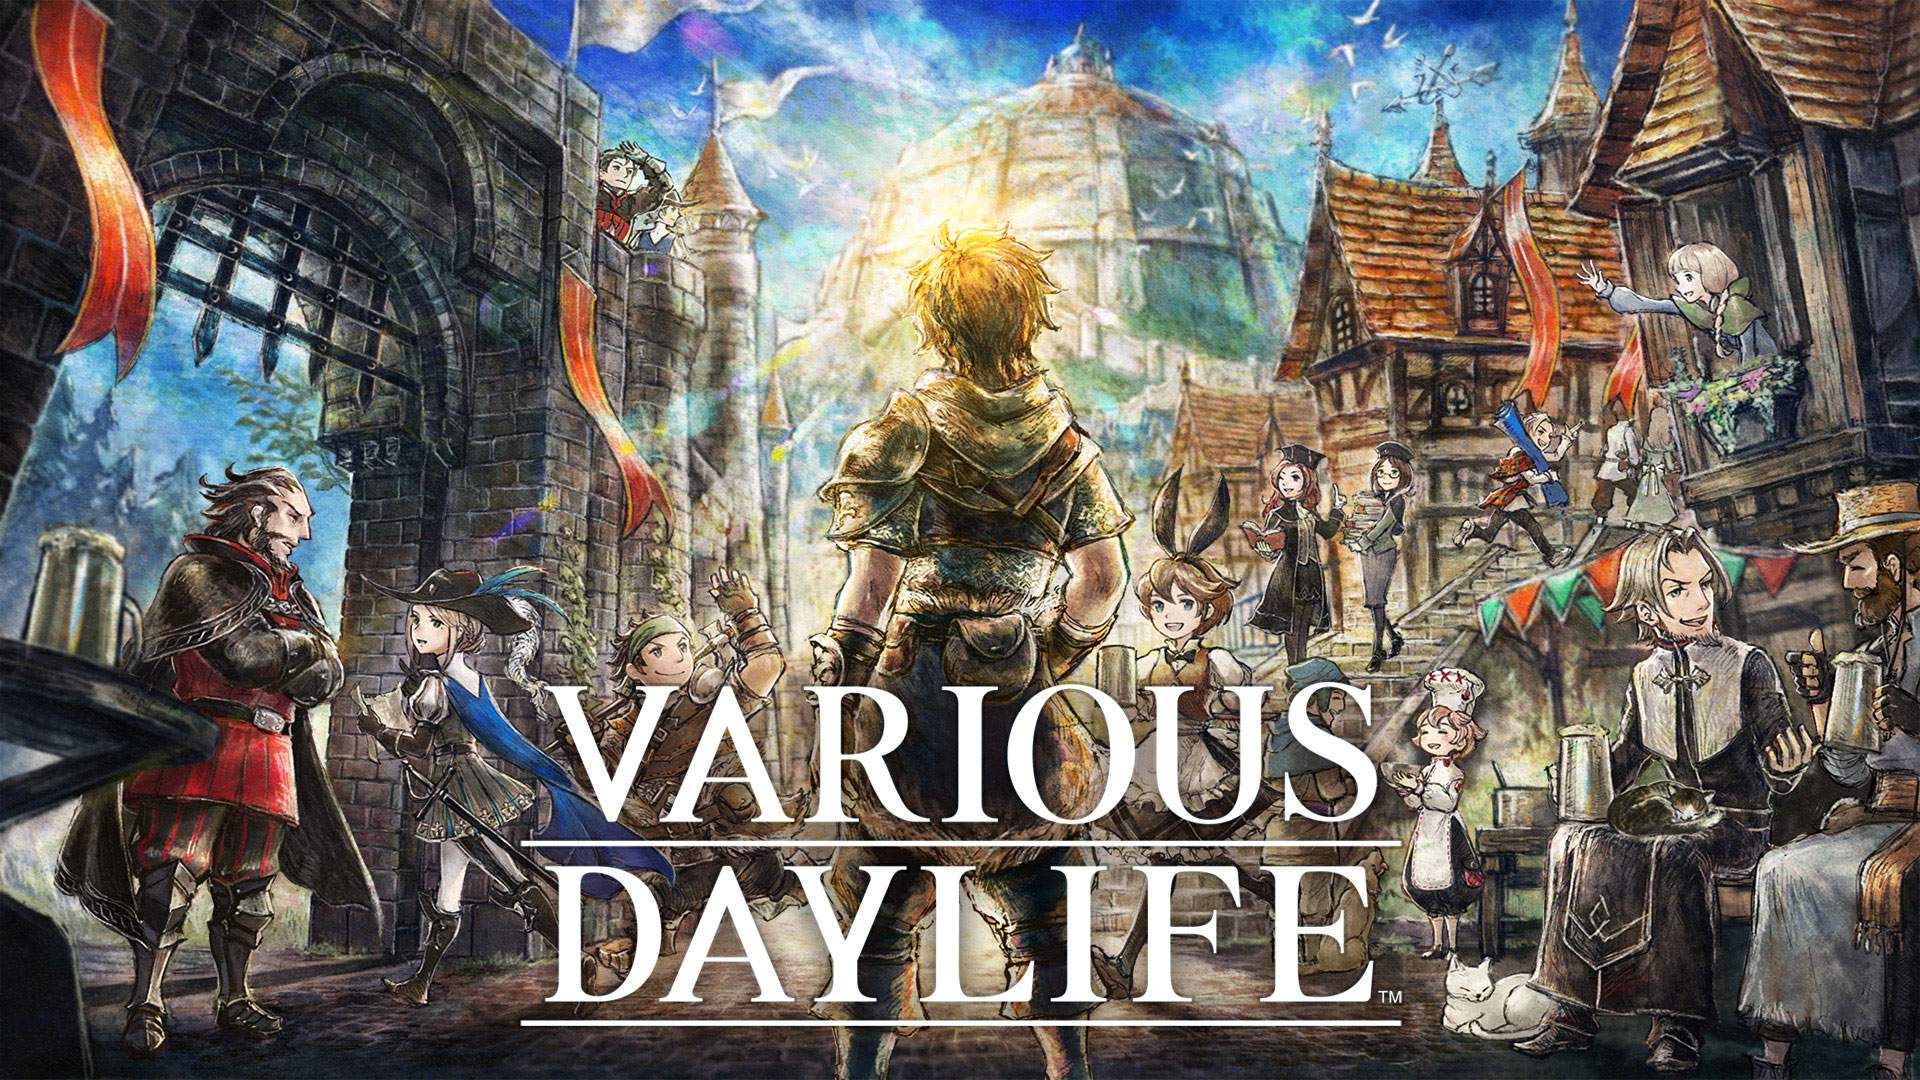 VARIOUS DAYLIFE keyart showing the protagonist standing in the center of a busy town.